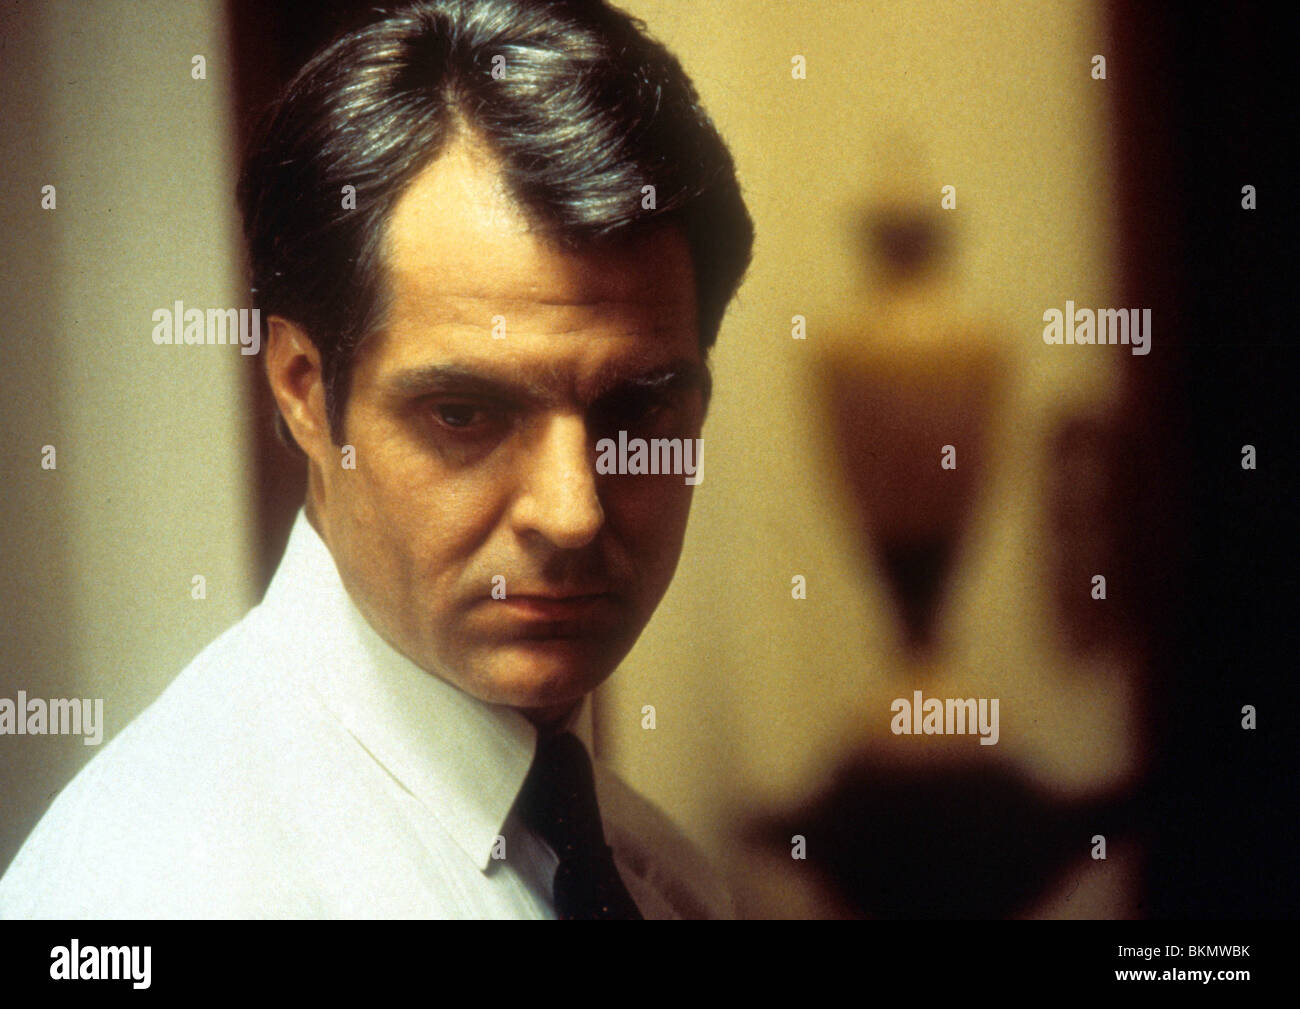 MISSION IMPOSSIBLE (1996) HENRY CZERNY MSNI 140 Banque D'Images